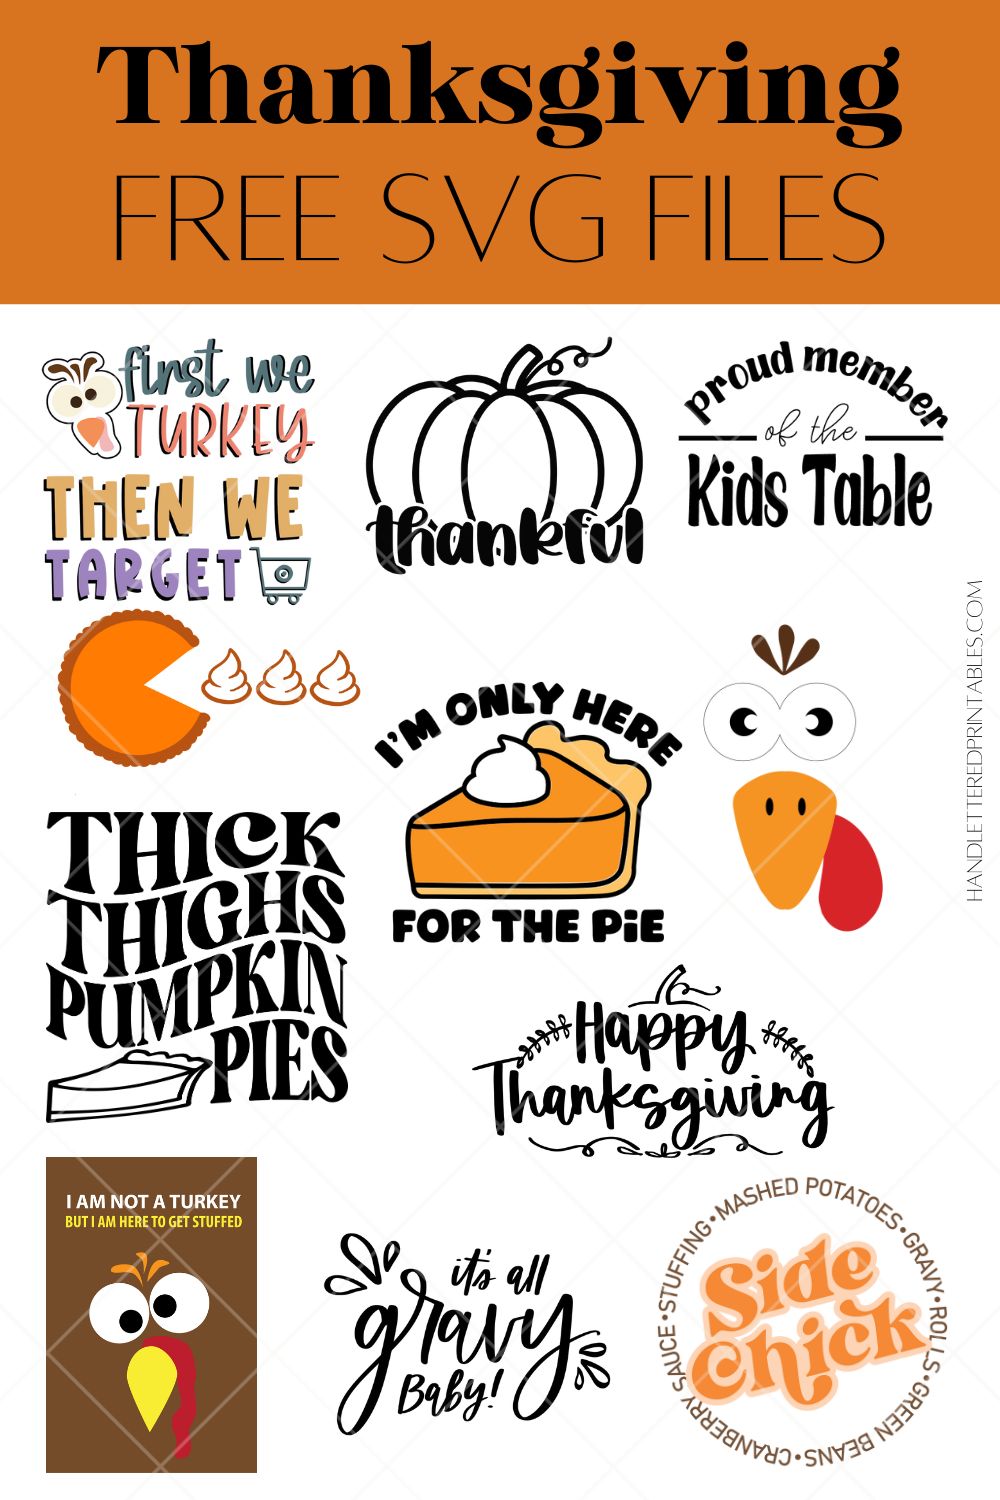 Free Thanksgiving SVG Files to download (collage of all files)